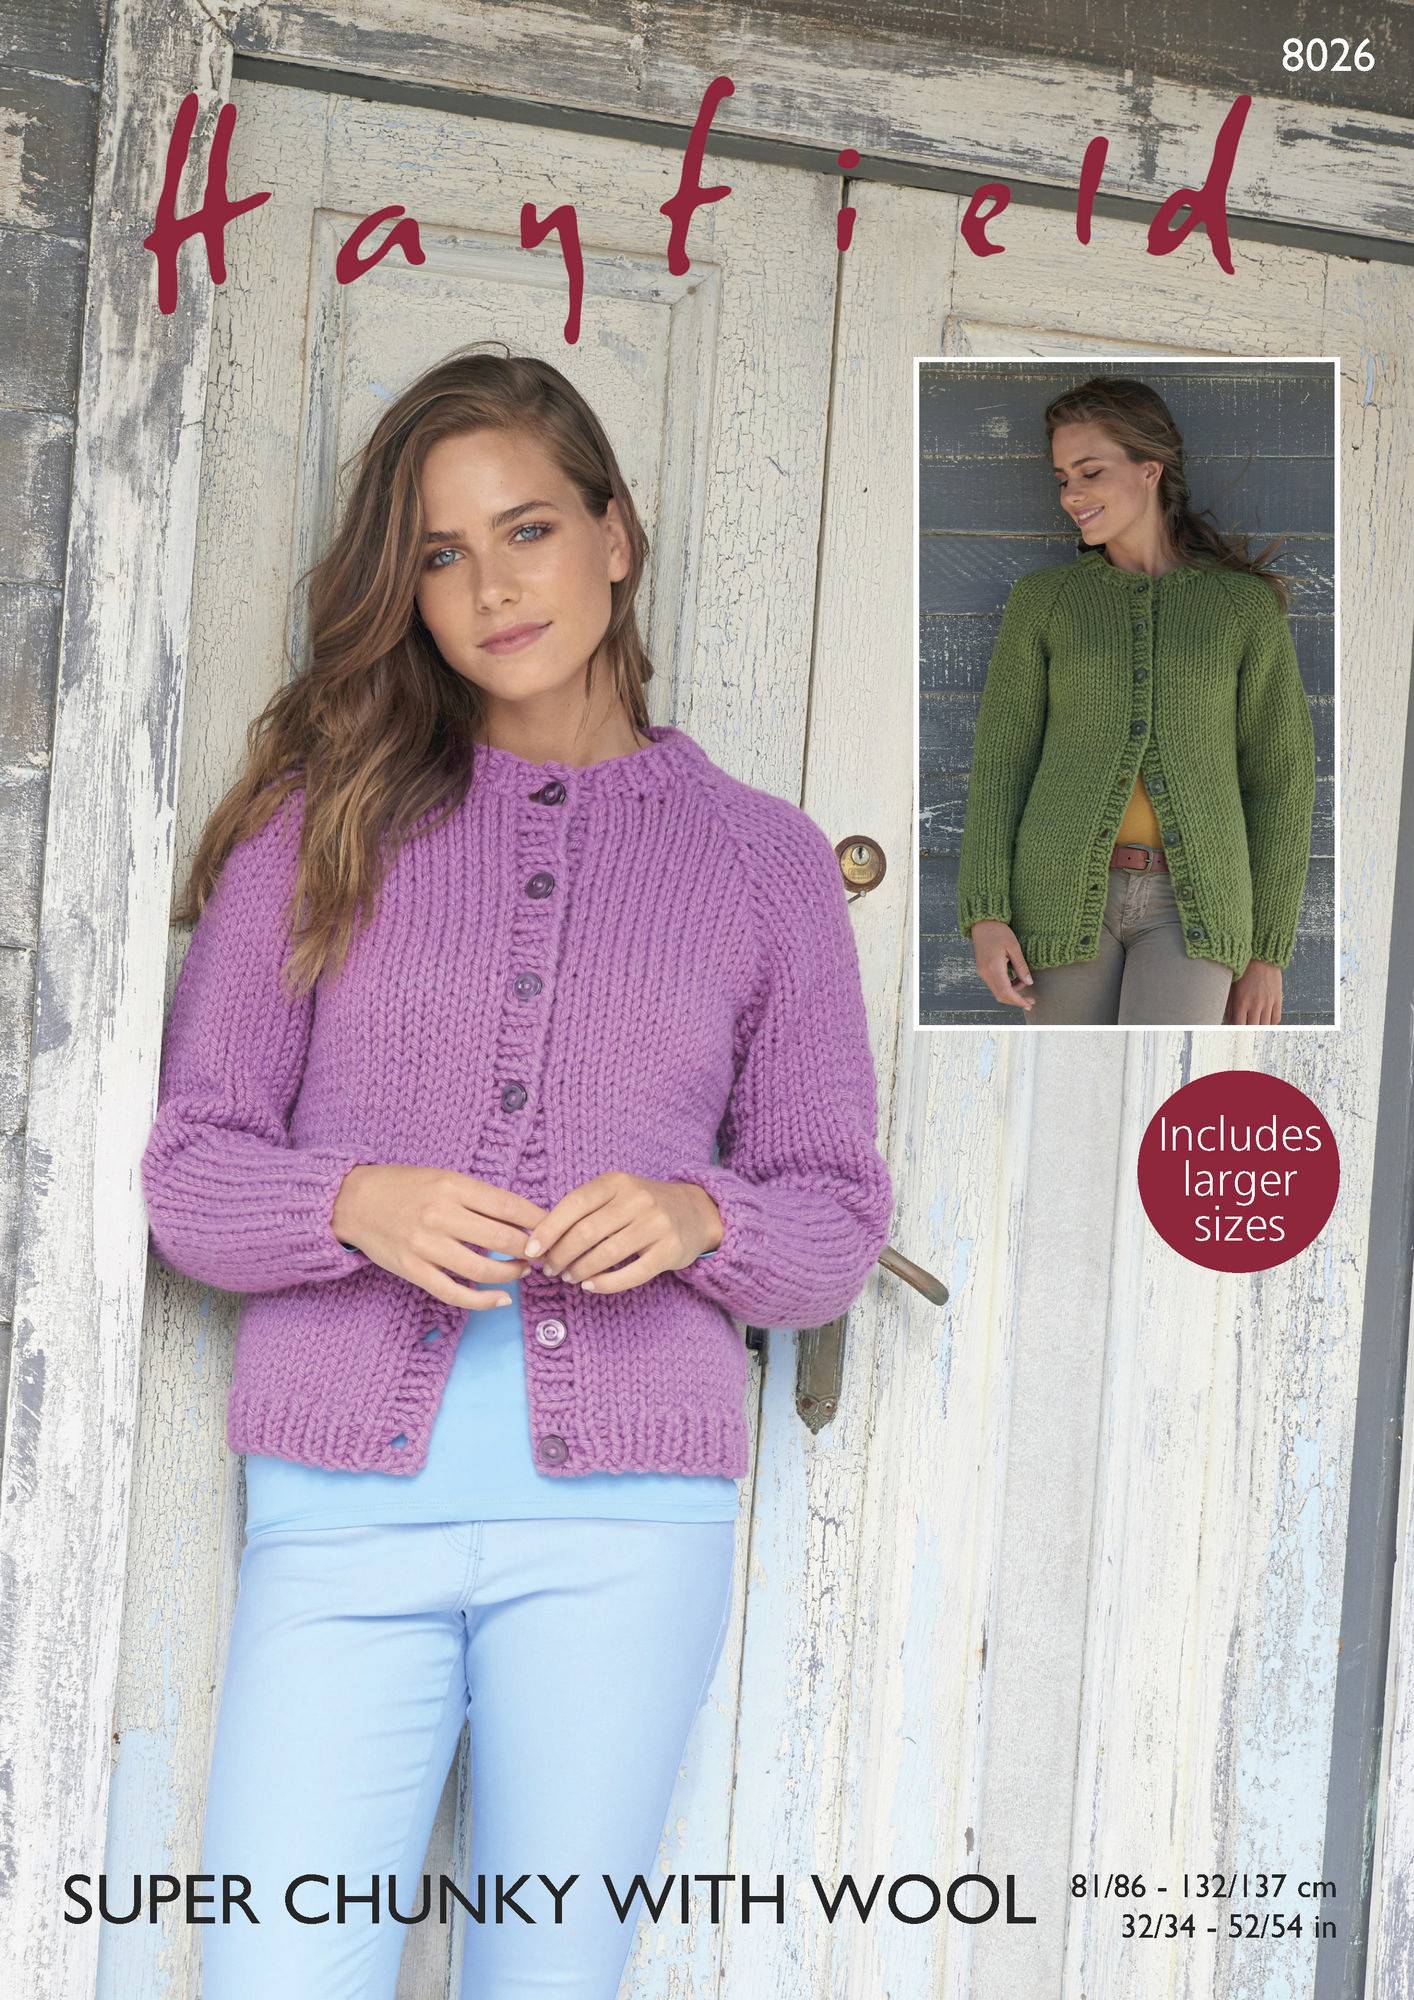 Women's Cardigan in Hayfield Super Chunky with Wool (8026) | The ...